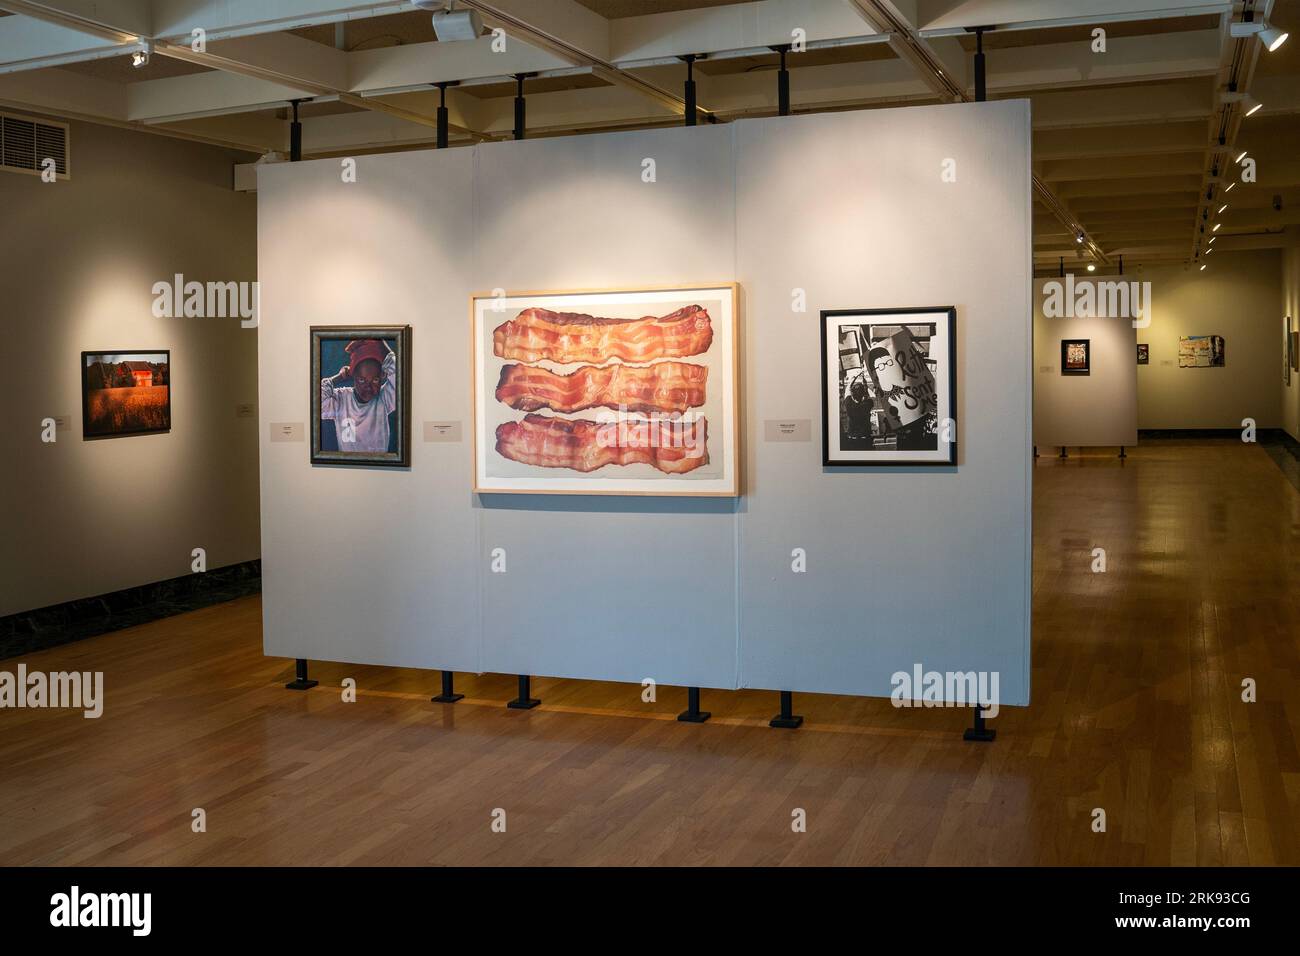 Butler Institute of American Art in Youngstown, Ohio Stockfoto